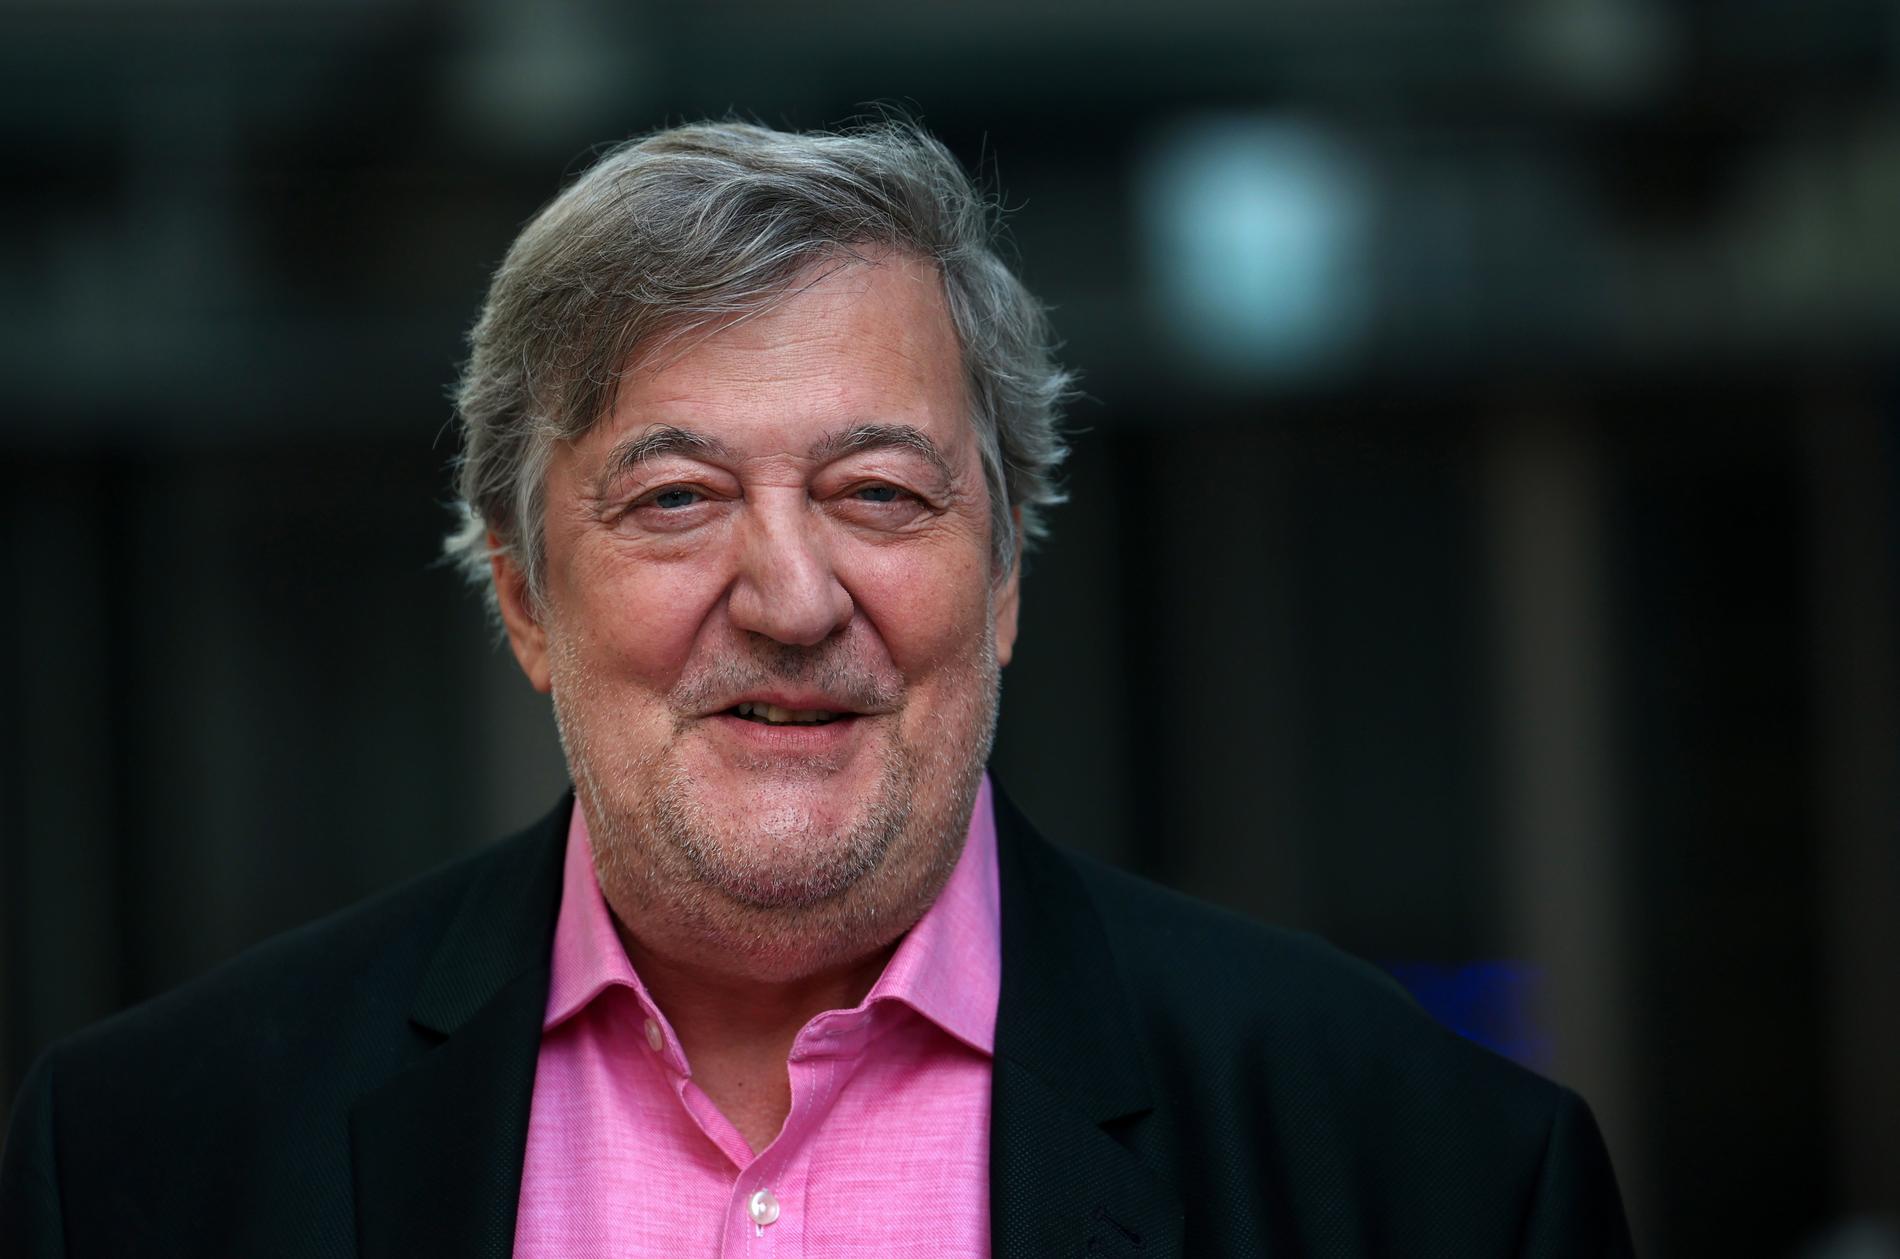 Stephen Fry Rushed to Hospital after Falling from Stage at Tech Festival